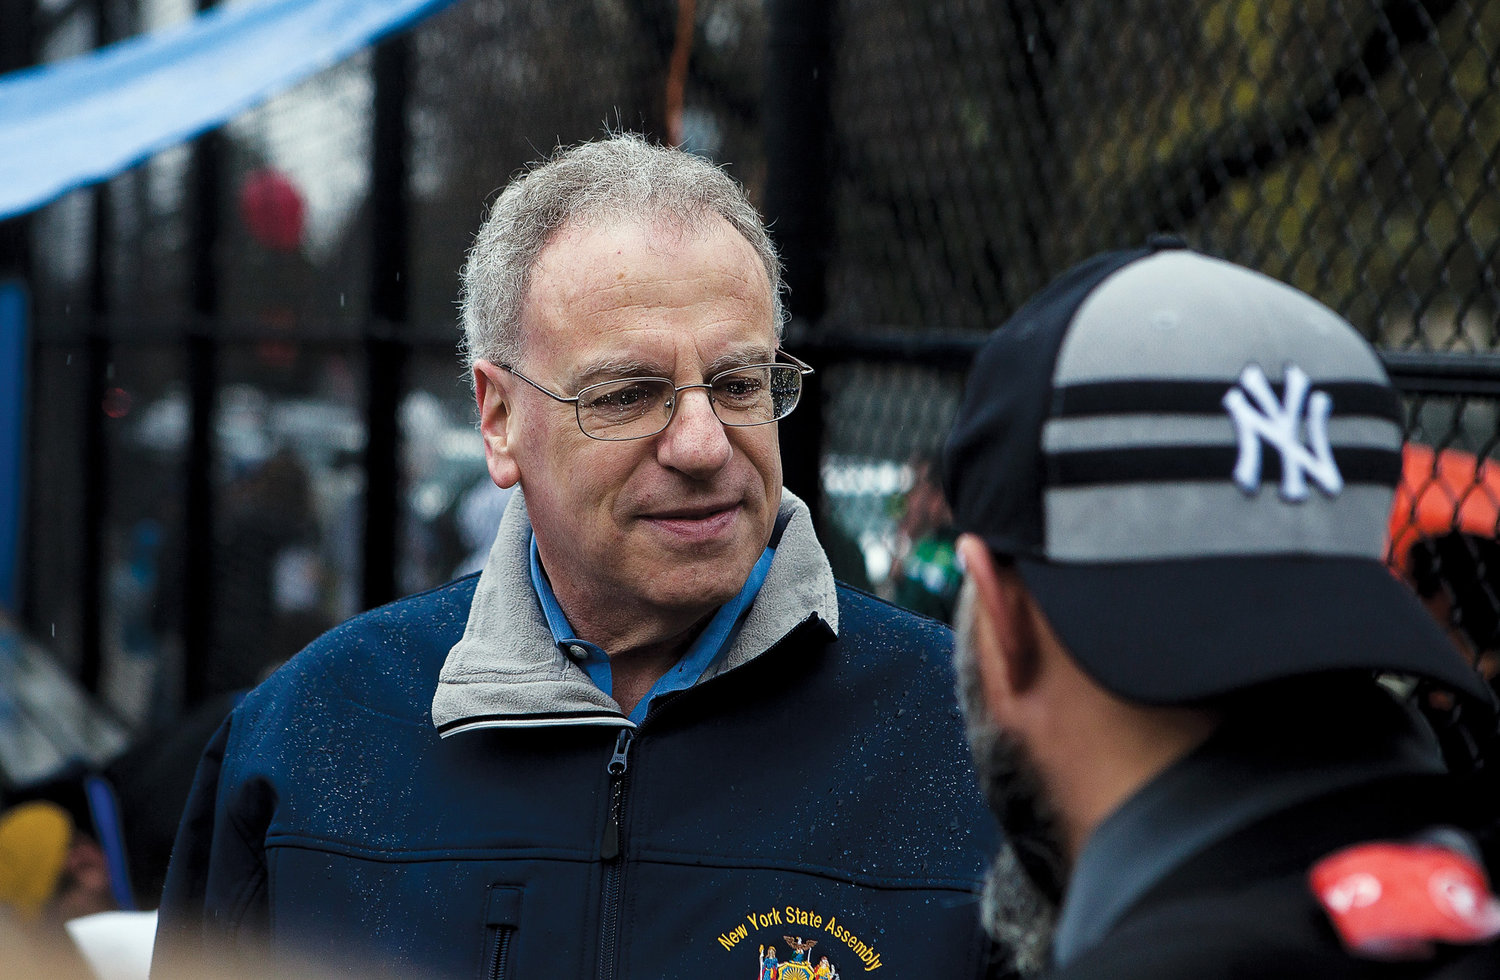 An appeals court delivered some good news to Assemblyman Jeffrey Dinowitz, removing a large chunk of a defamation lawsuit filed against him by a former P.S. 24 administrator, while vastly reducing the amount of money the lawmaker could be out if a court were to ultimately find against him.